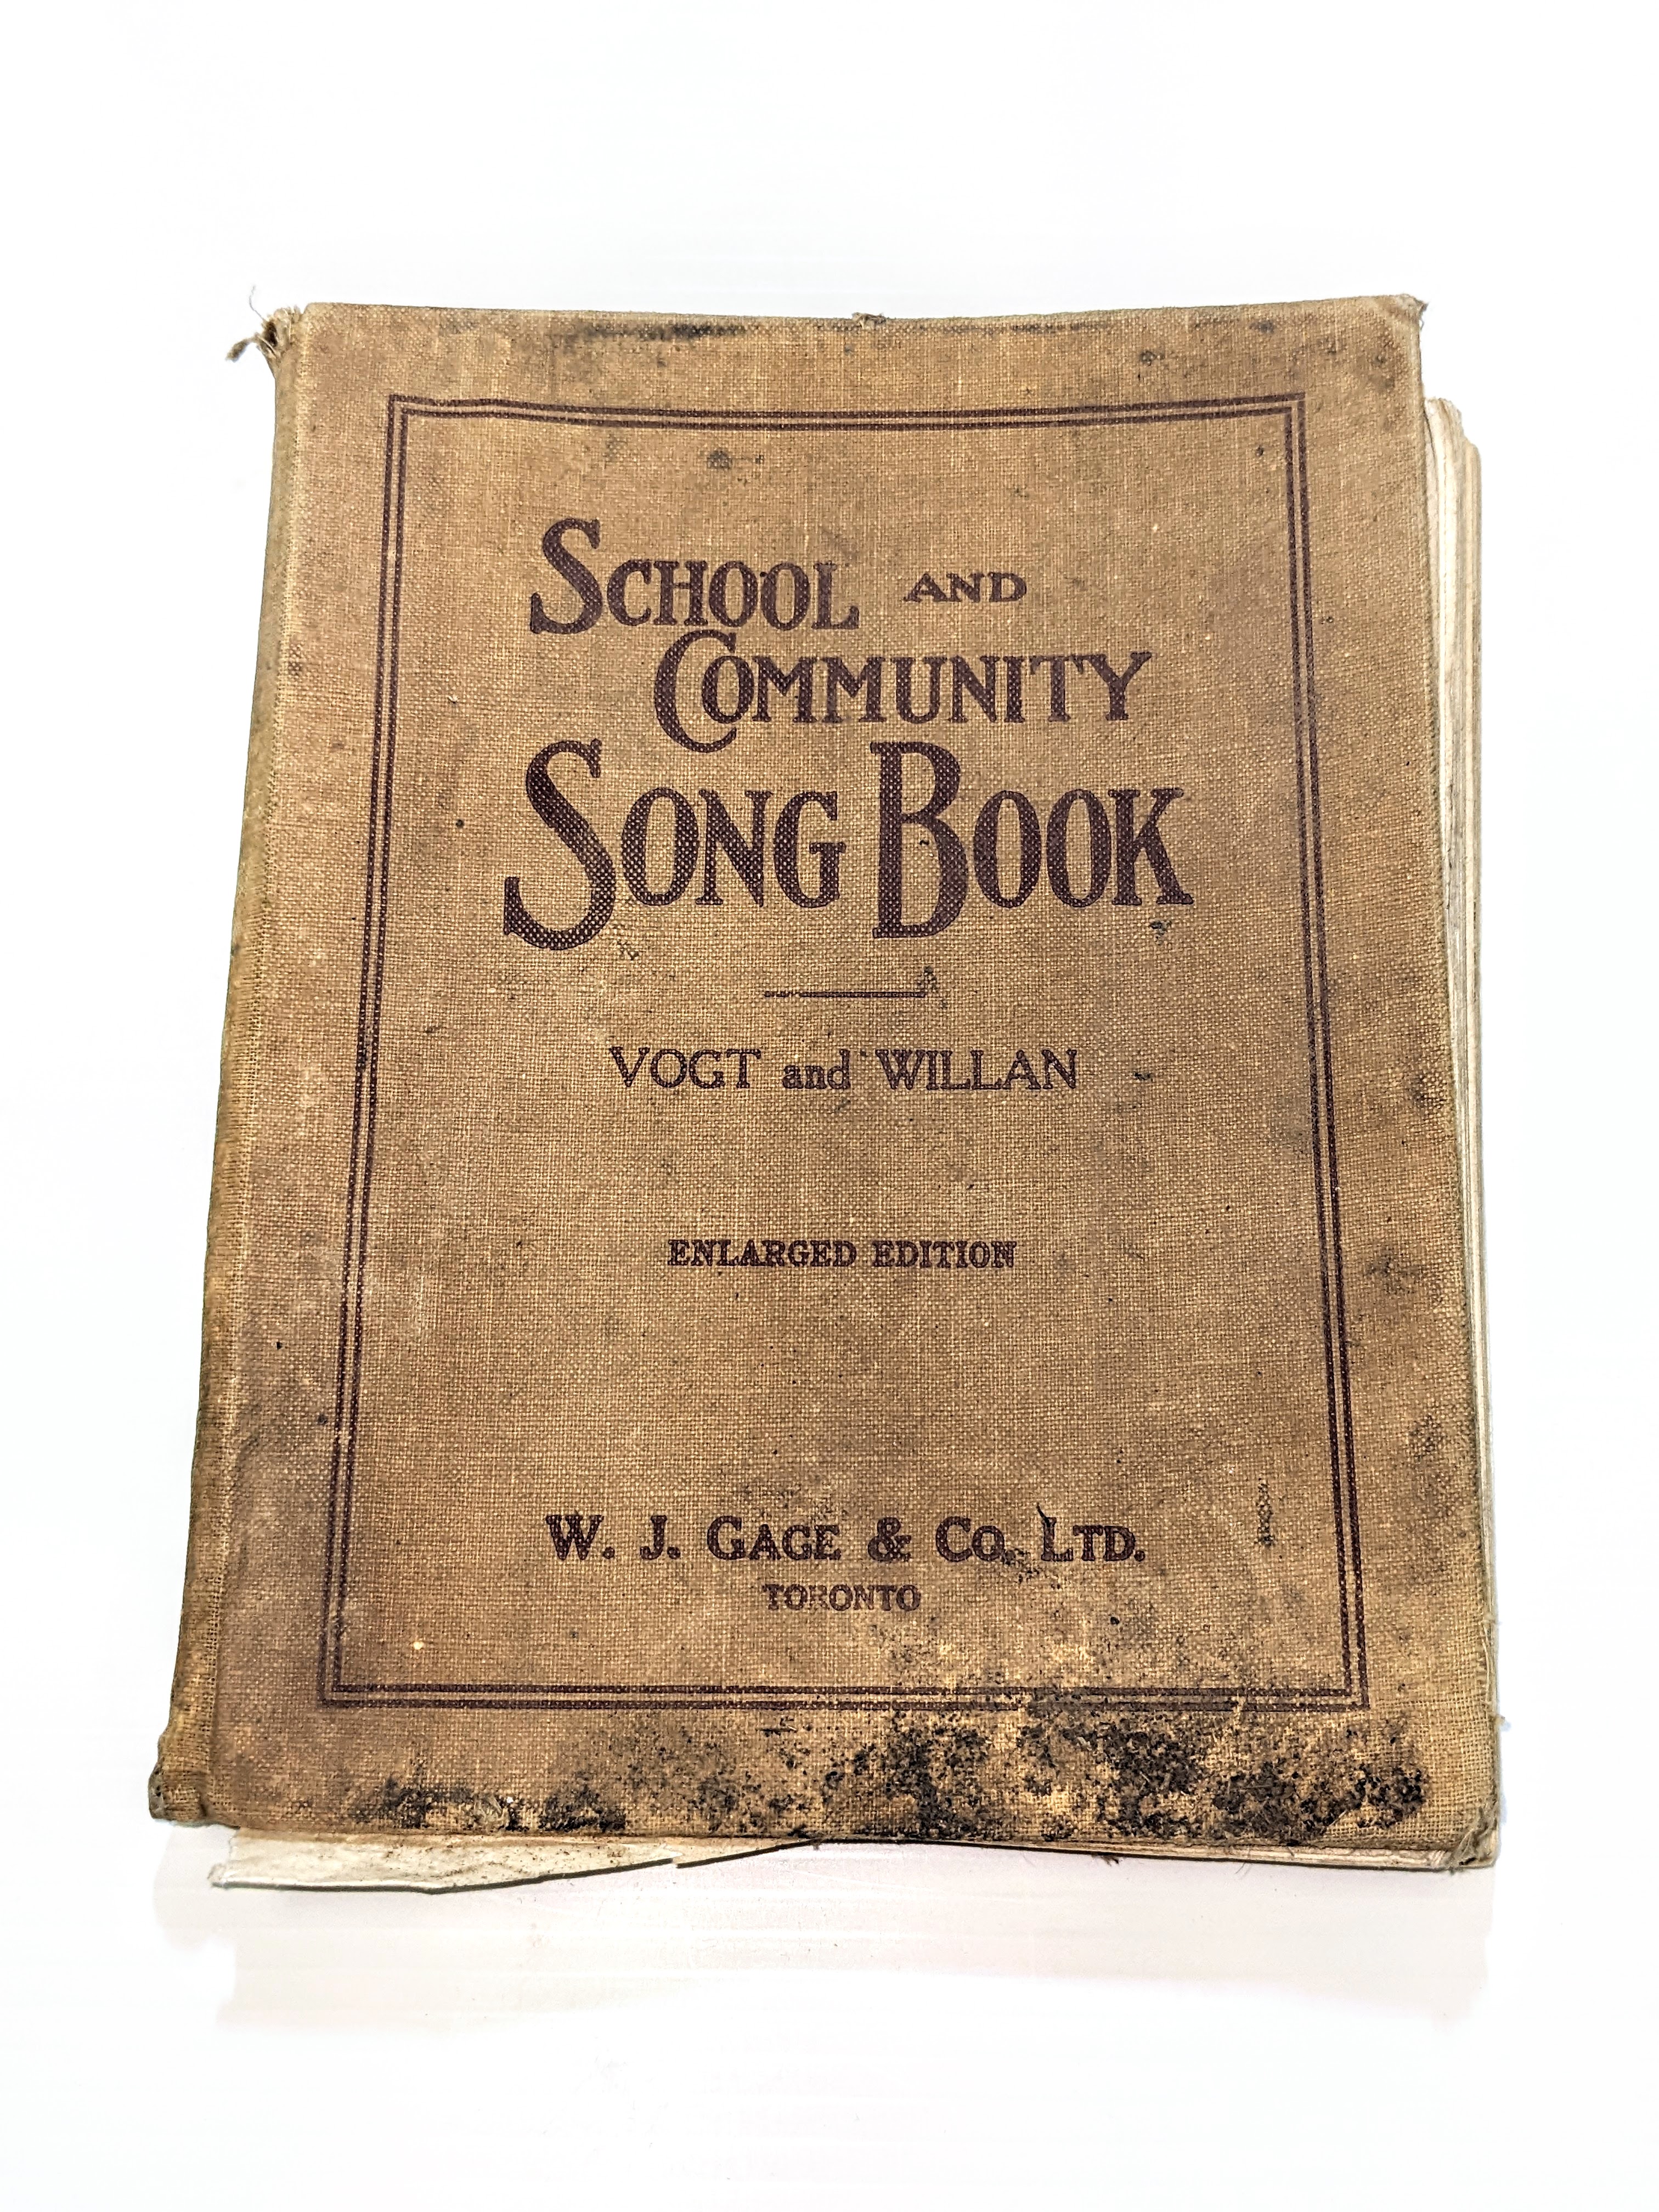 This songbook comes from 1927 and contains numerous familiar songs such as "O Canada" "God Save the King" and "The first Nowell". Such songbooks were important sources of learning and entertainment - kids learning to sing in school and groups performing during special events, or just gathered around the home fire. For a taste of this type of music attend the Old Bay House open house Dec 3rd from 7-7:45pm where the Hilltop Choir will be singing Christmas Carols.
997.108 / Fort Vermilion Heritage Centre.
20/11/2022